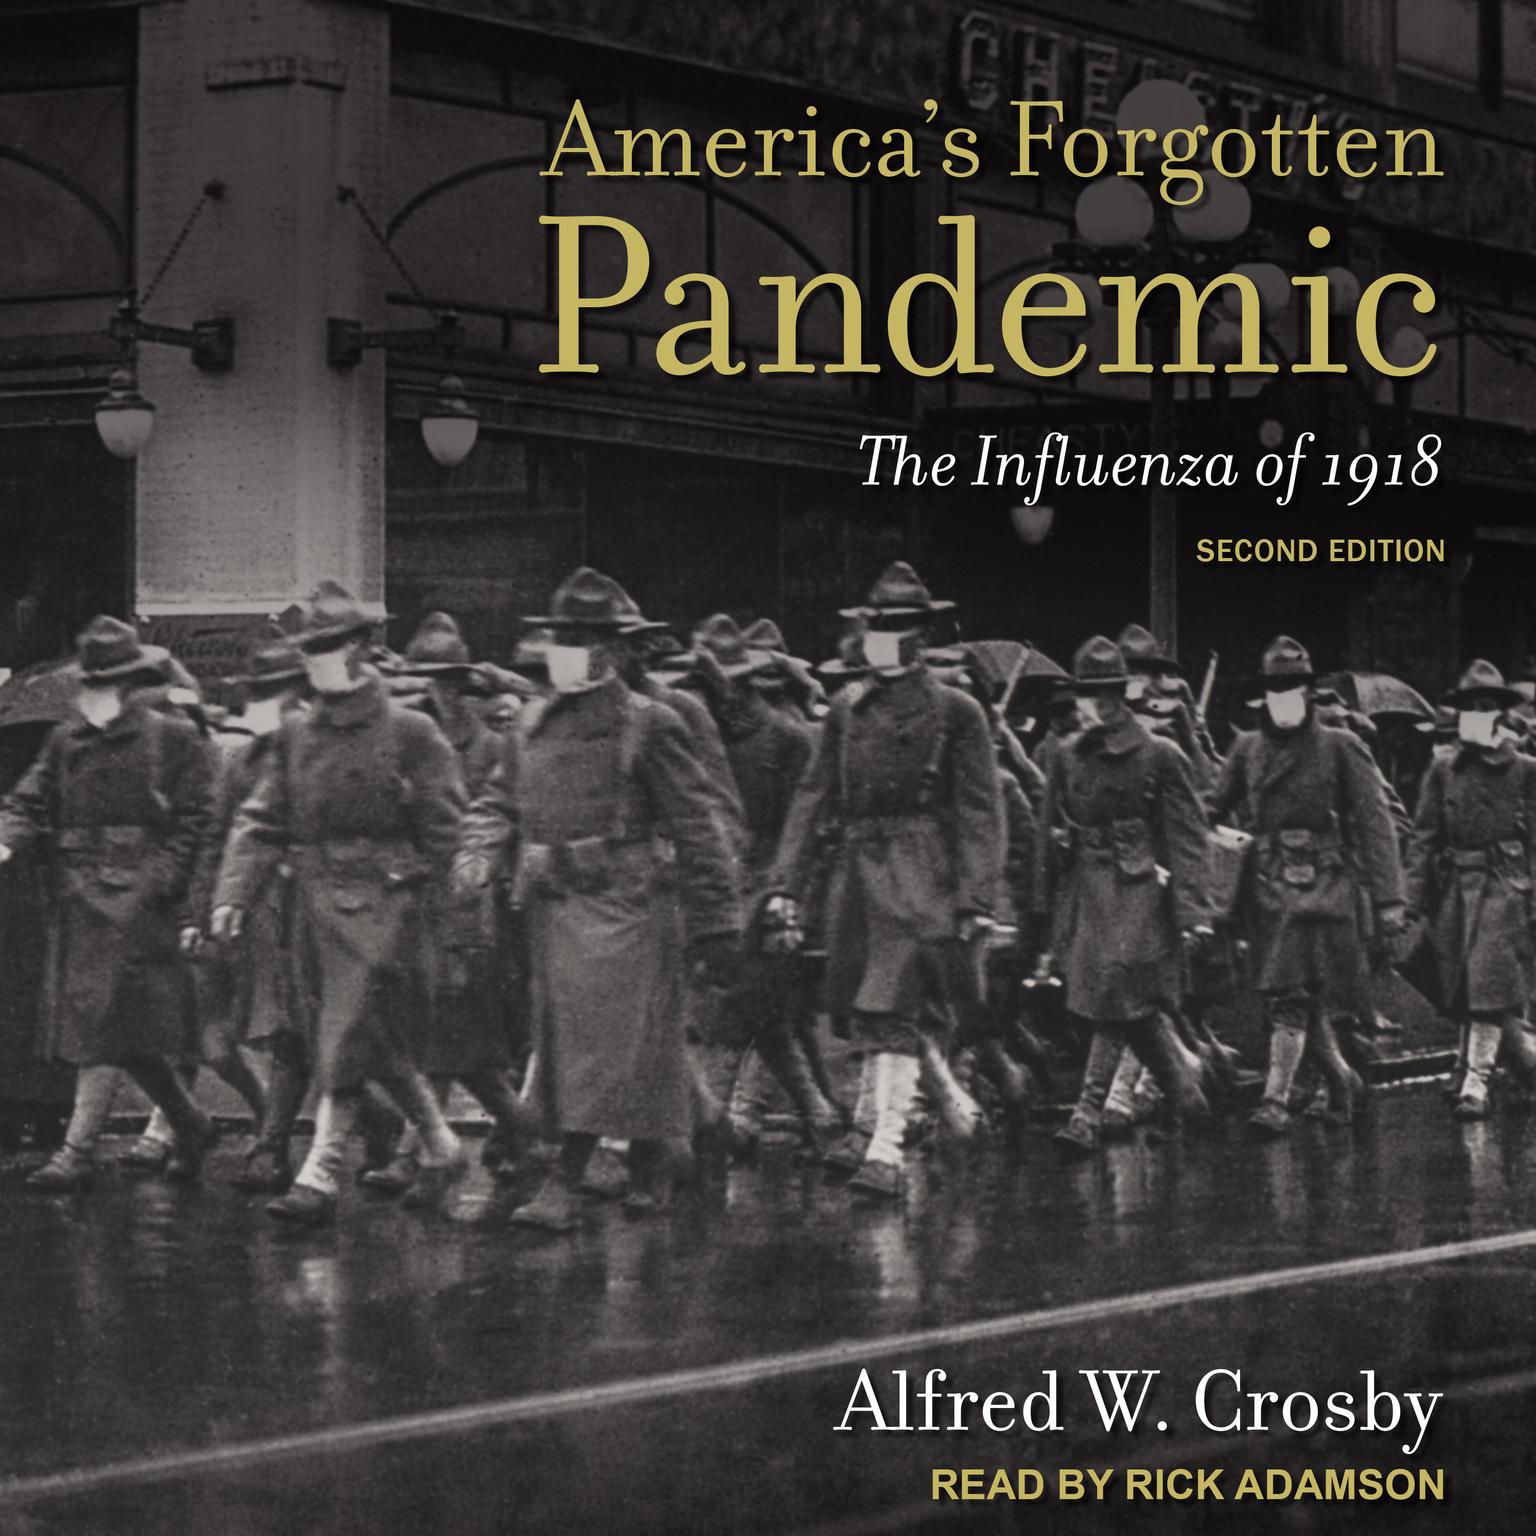 Americas Forgotten Pandemic: The Influenza of 1918, Second Edition Audiobook, by Afred W. Crosby